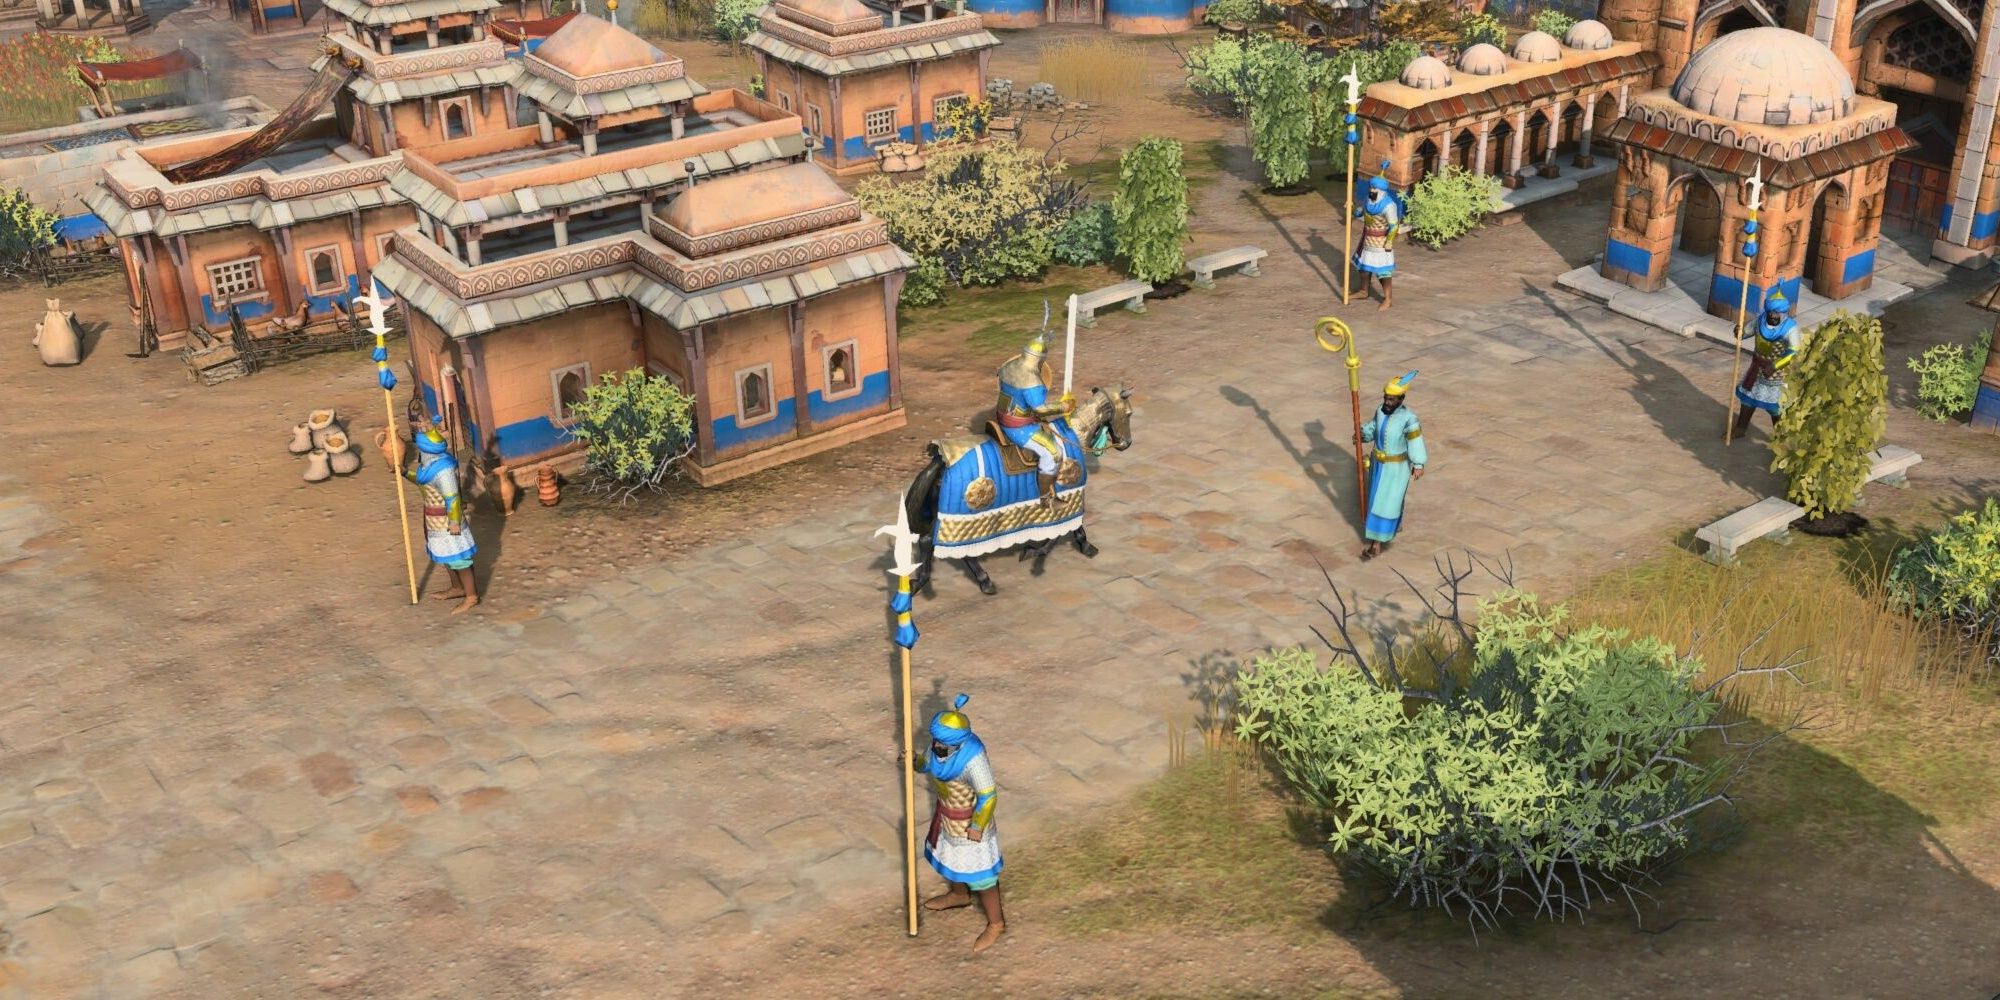 Delhi Sultanate Base From Age Of Empires 4